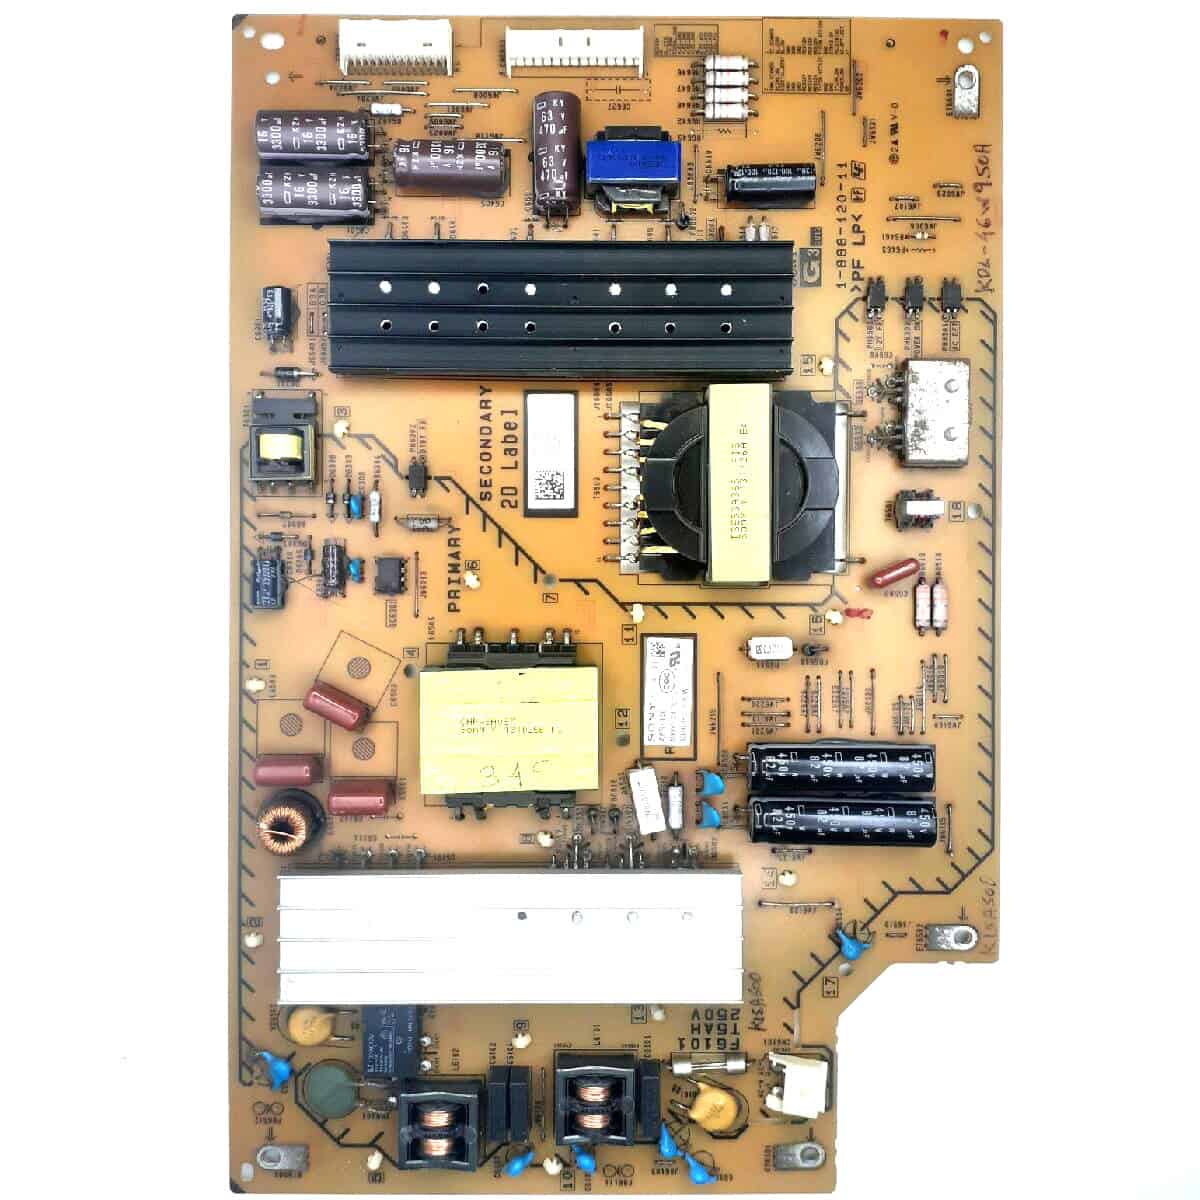 KLV-42W850A-SONY-POWER-SUPPLY-BOARD-FOR-LED-TV